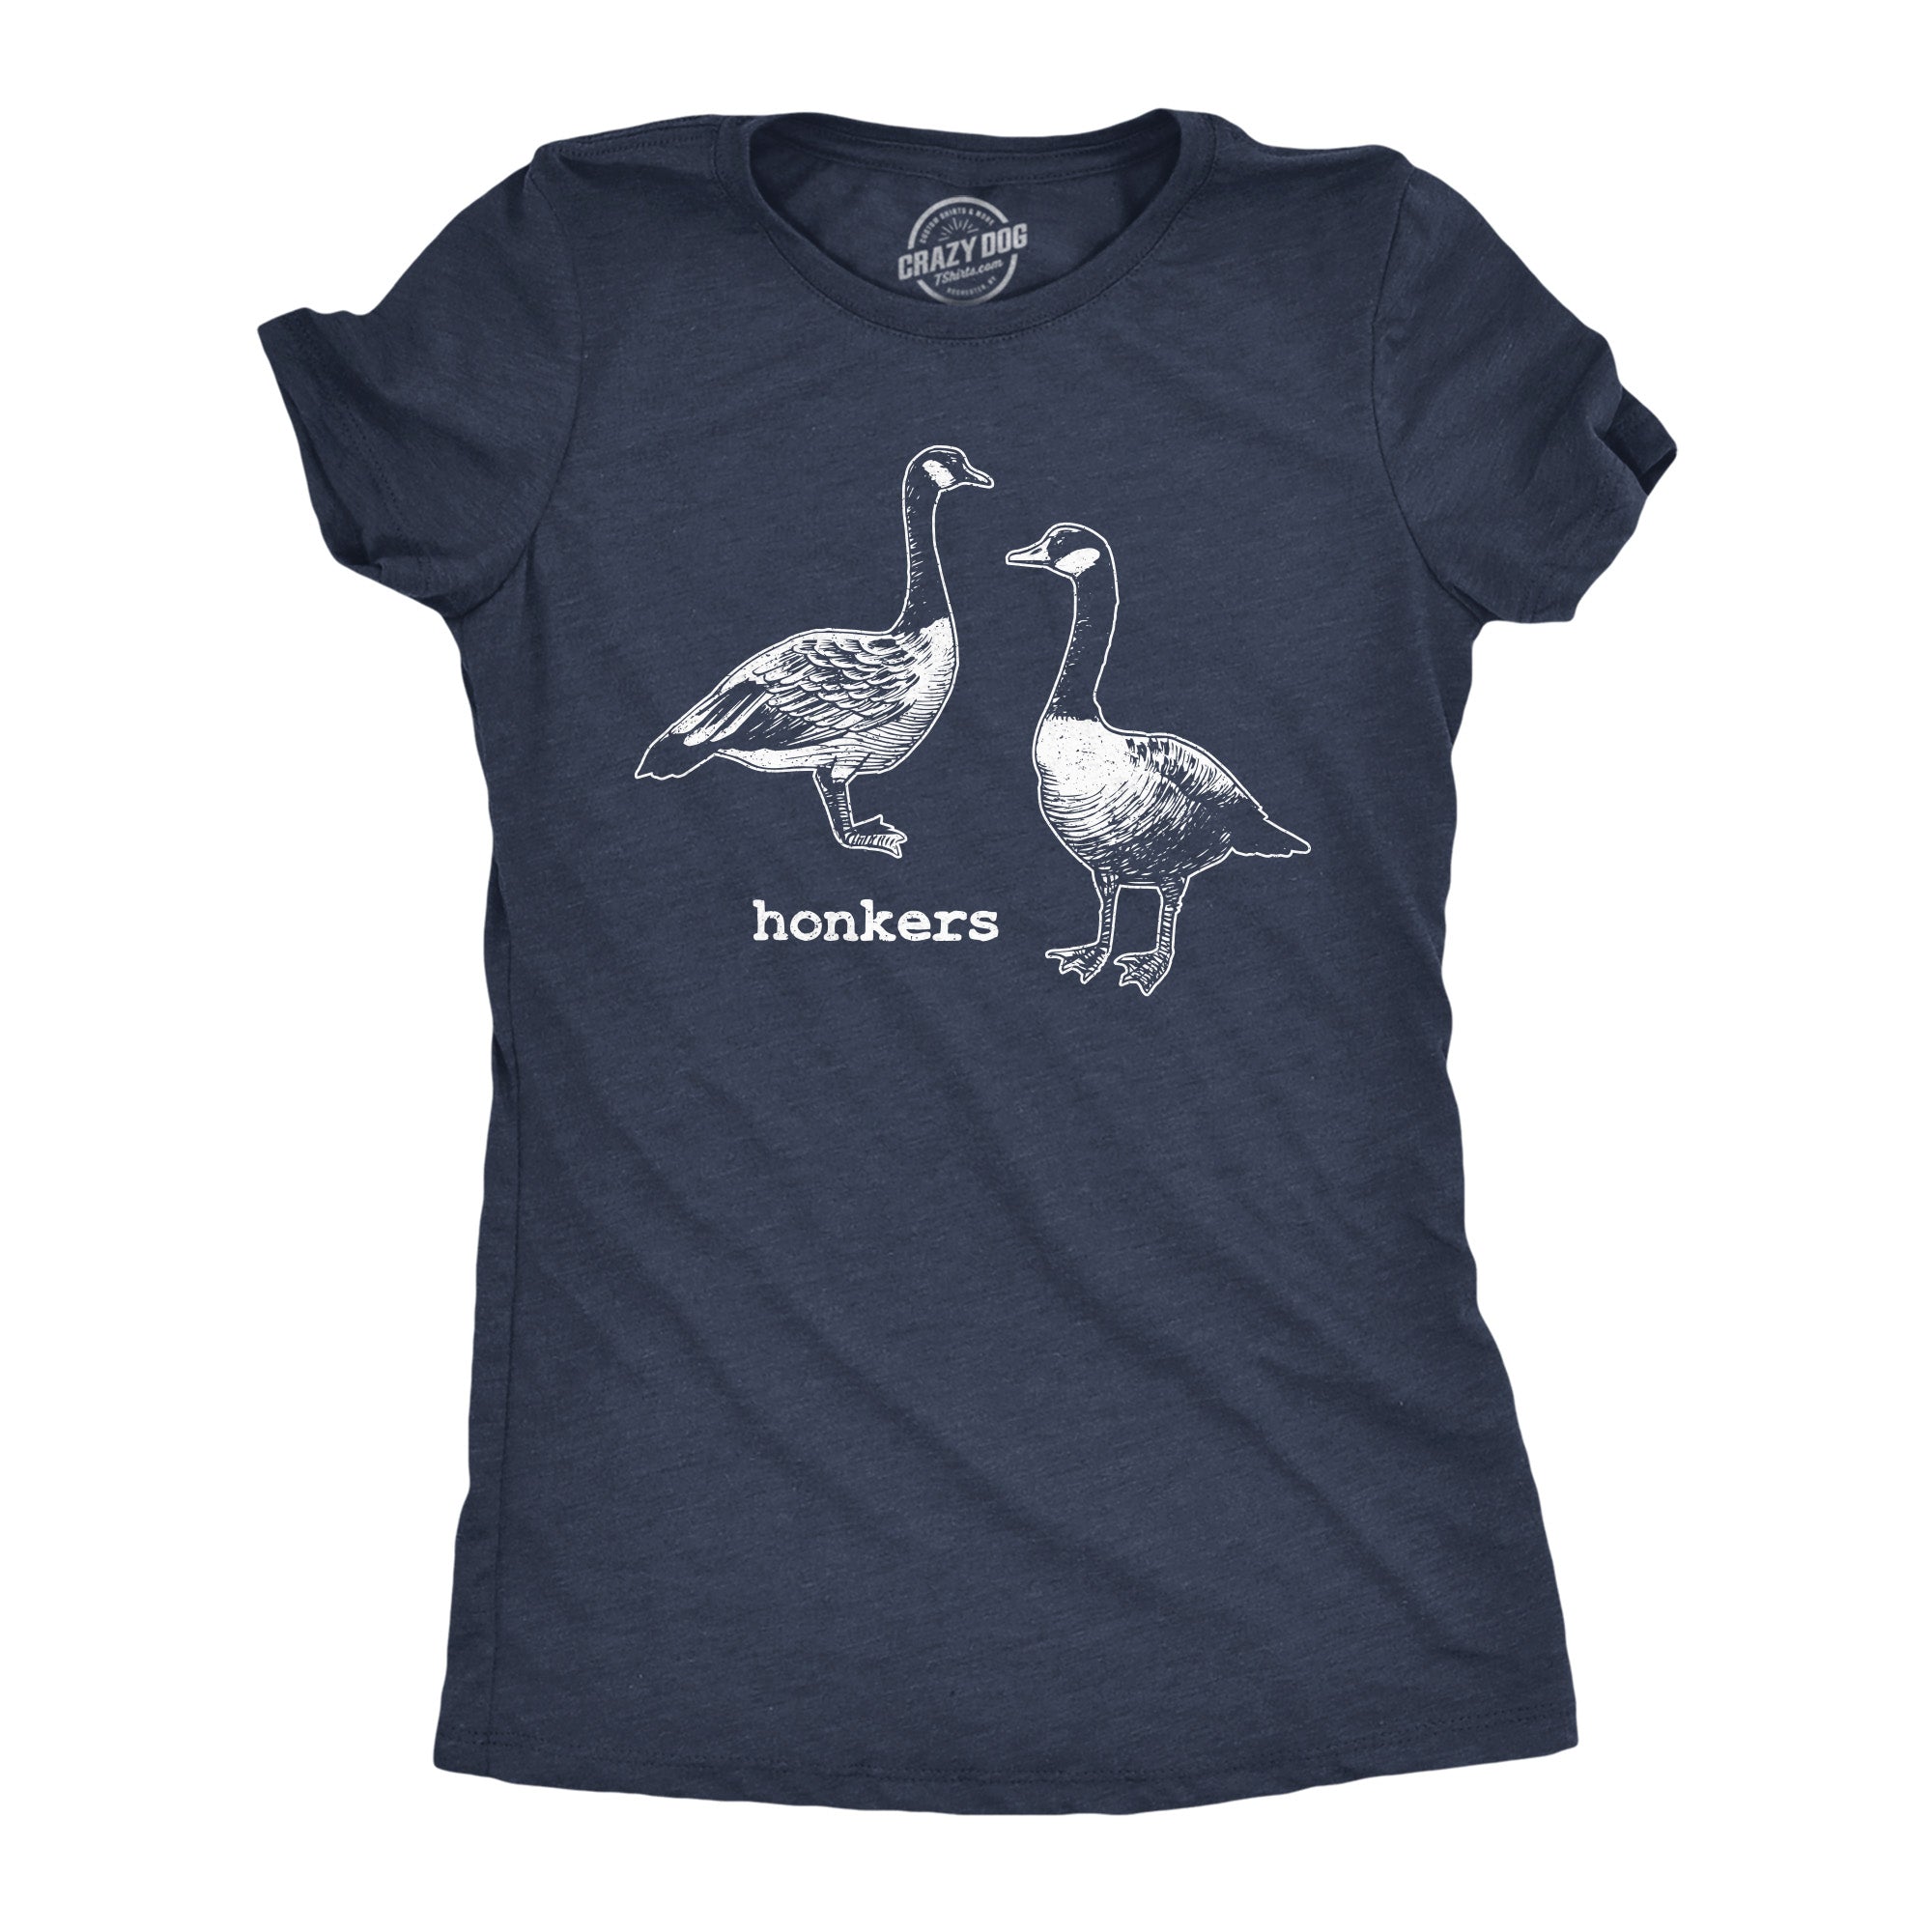 Funny Heather Navy - Honkers Honkers Womens T Shirt Nerdy animal sarcastic Tee